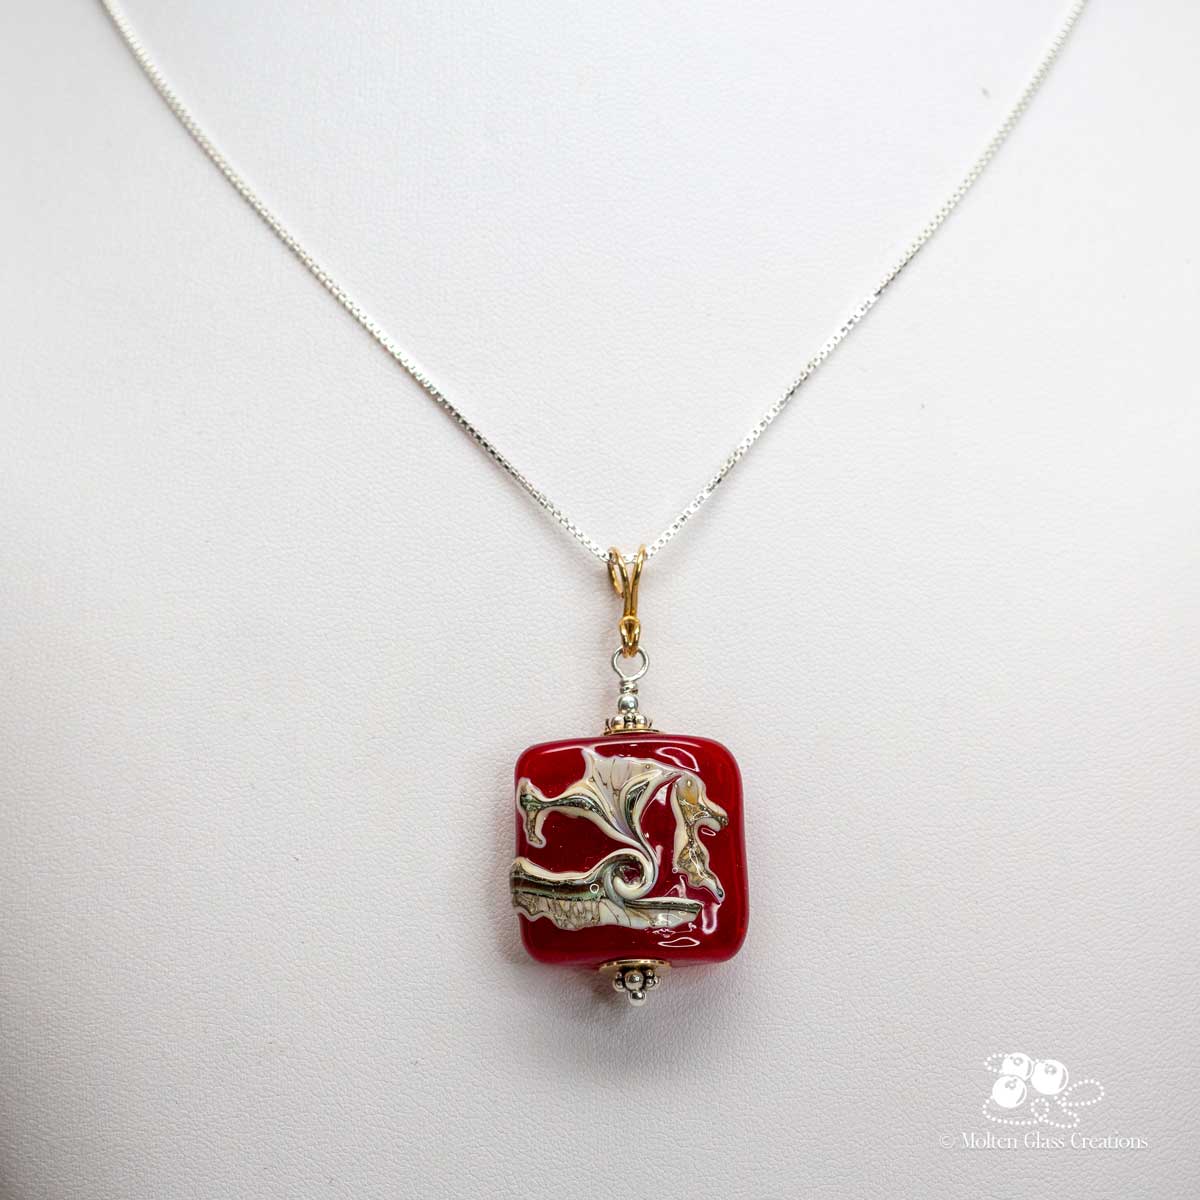 Red and Ivory Tab Necklace - Molten Glass Creations